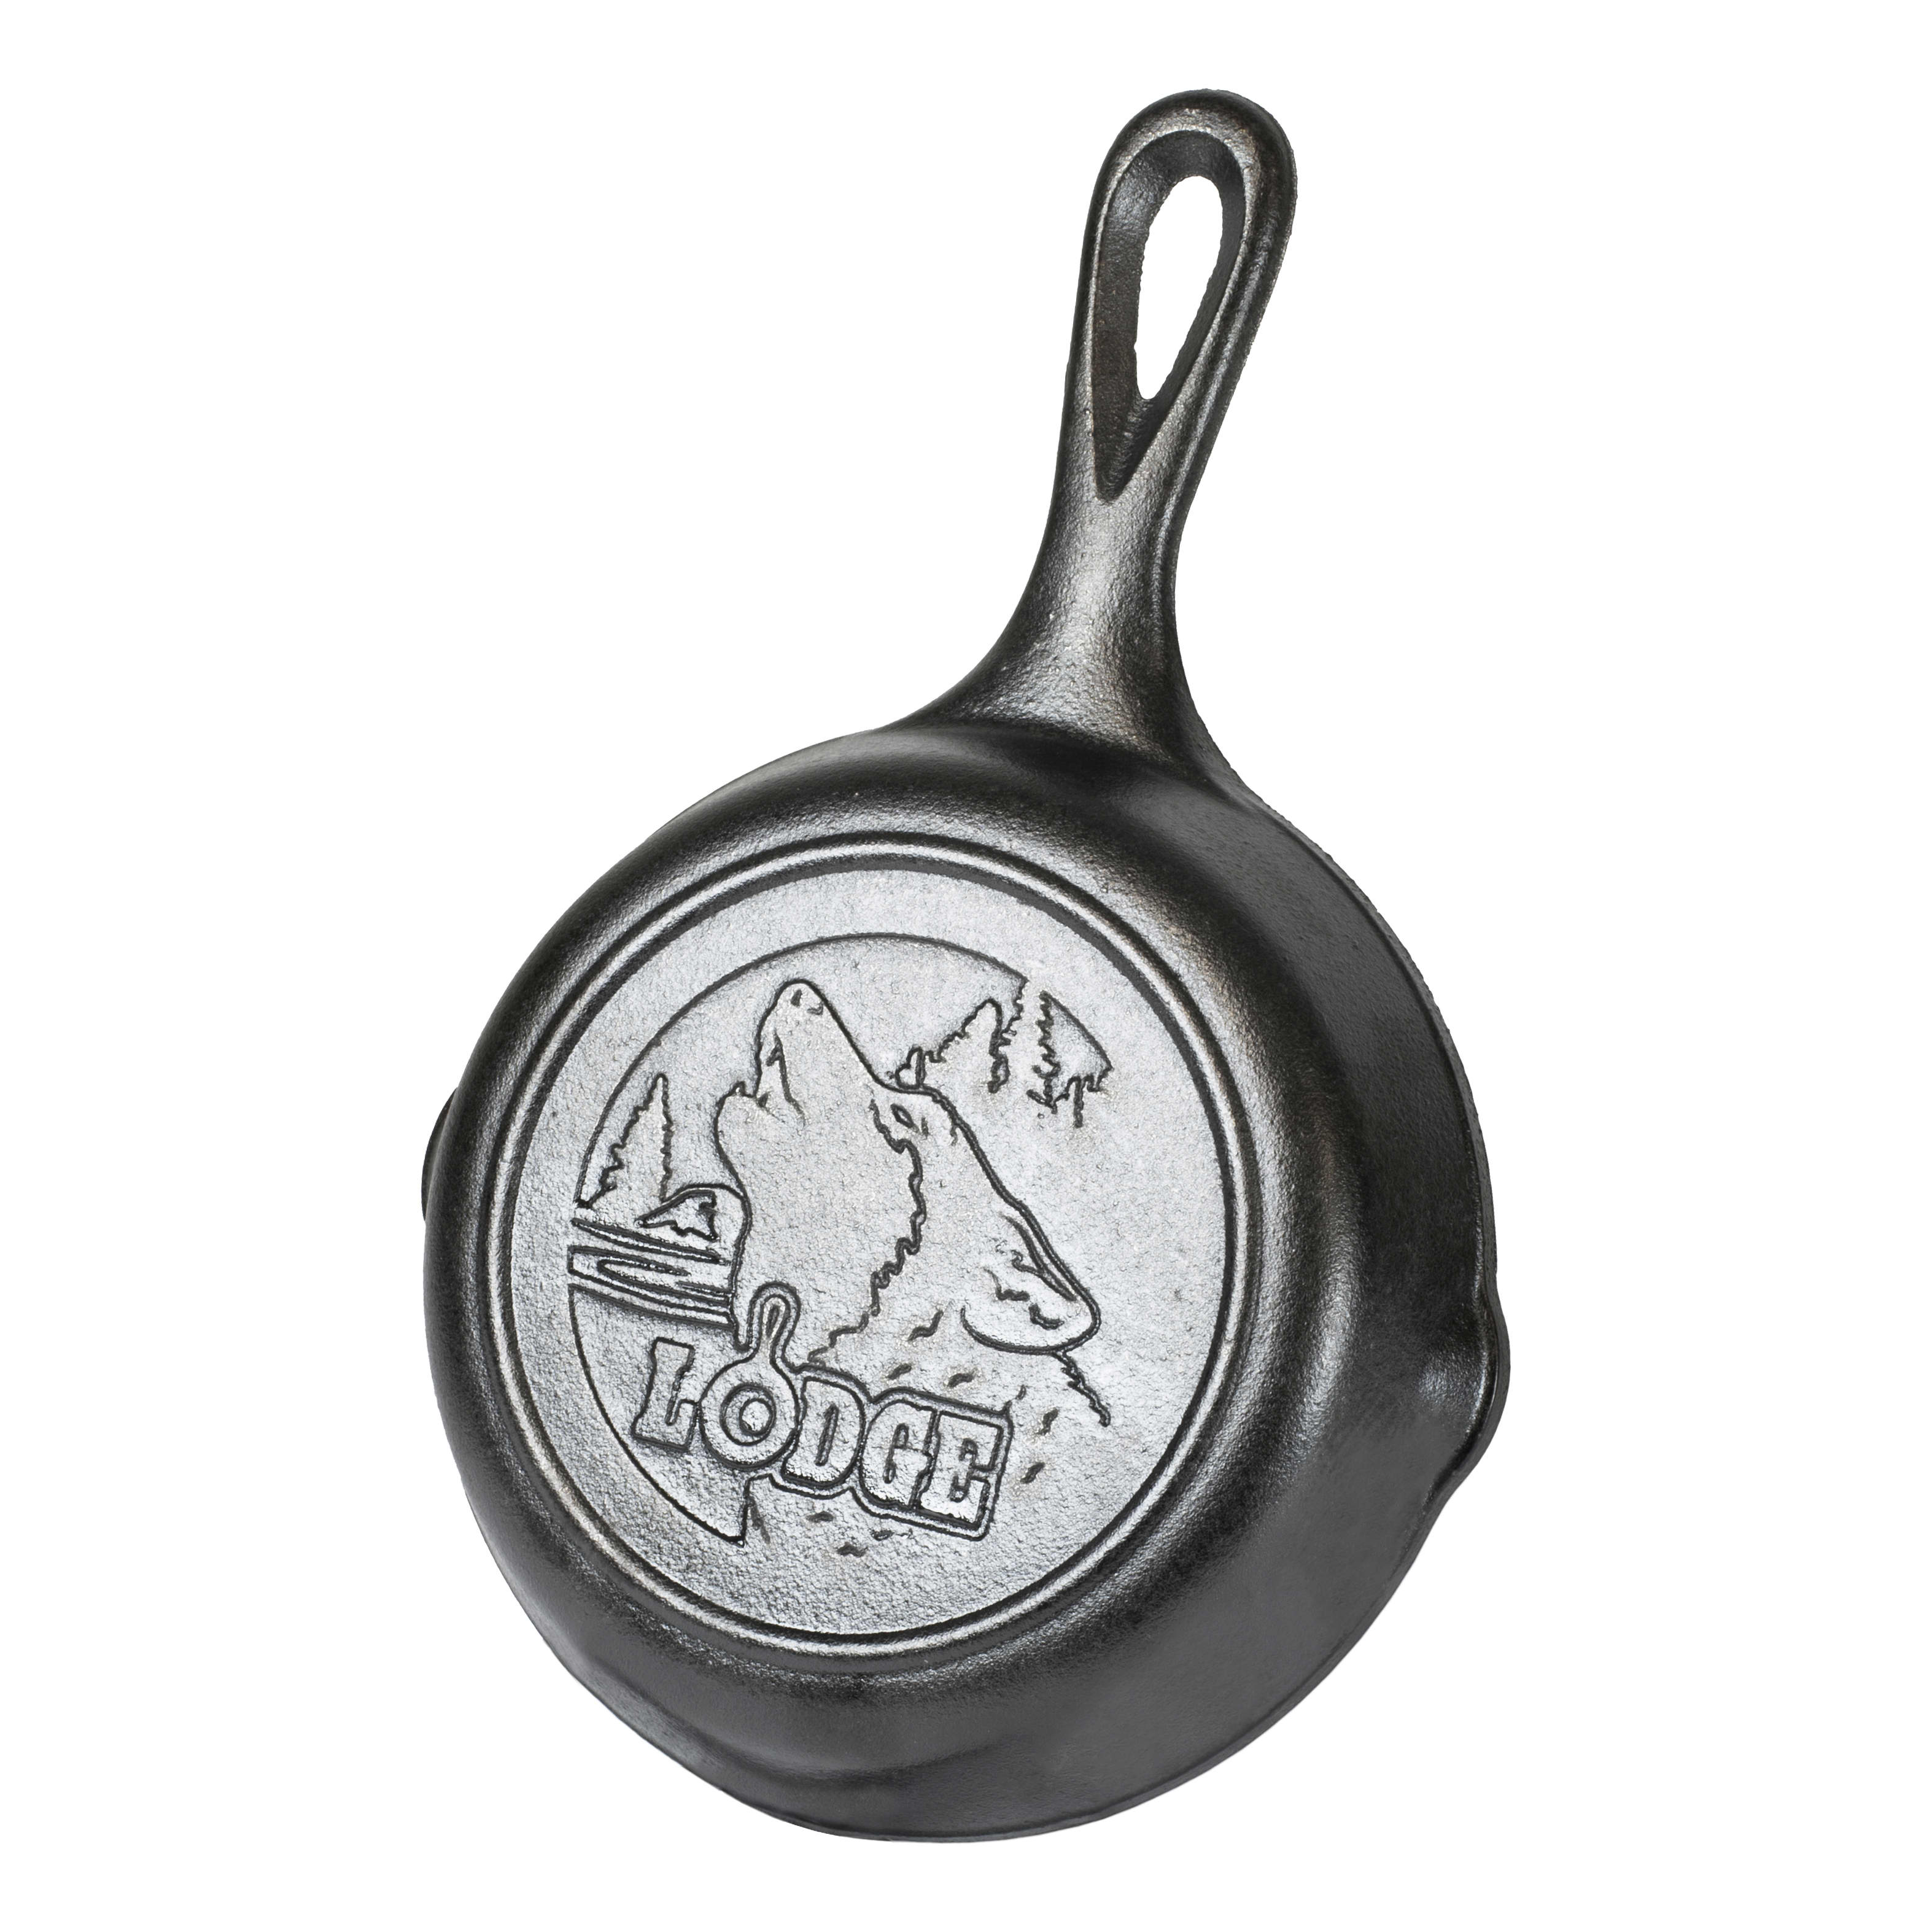 Lodge 6-1/2" Cast Iron Skillet with Wolf Scene